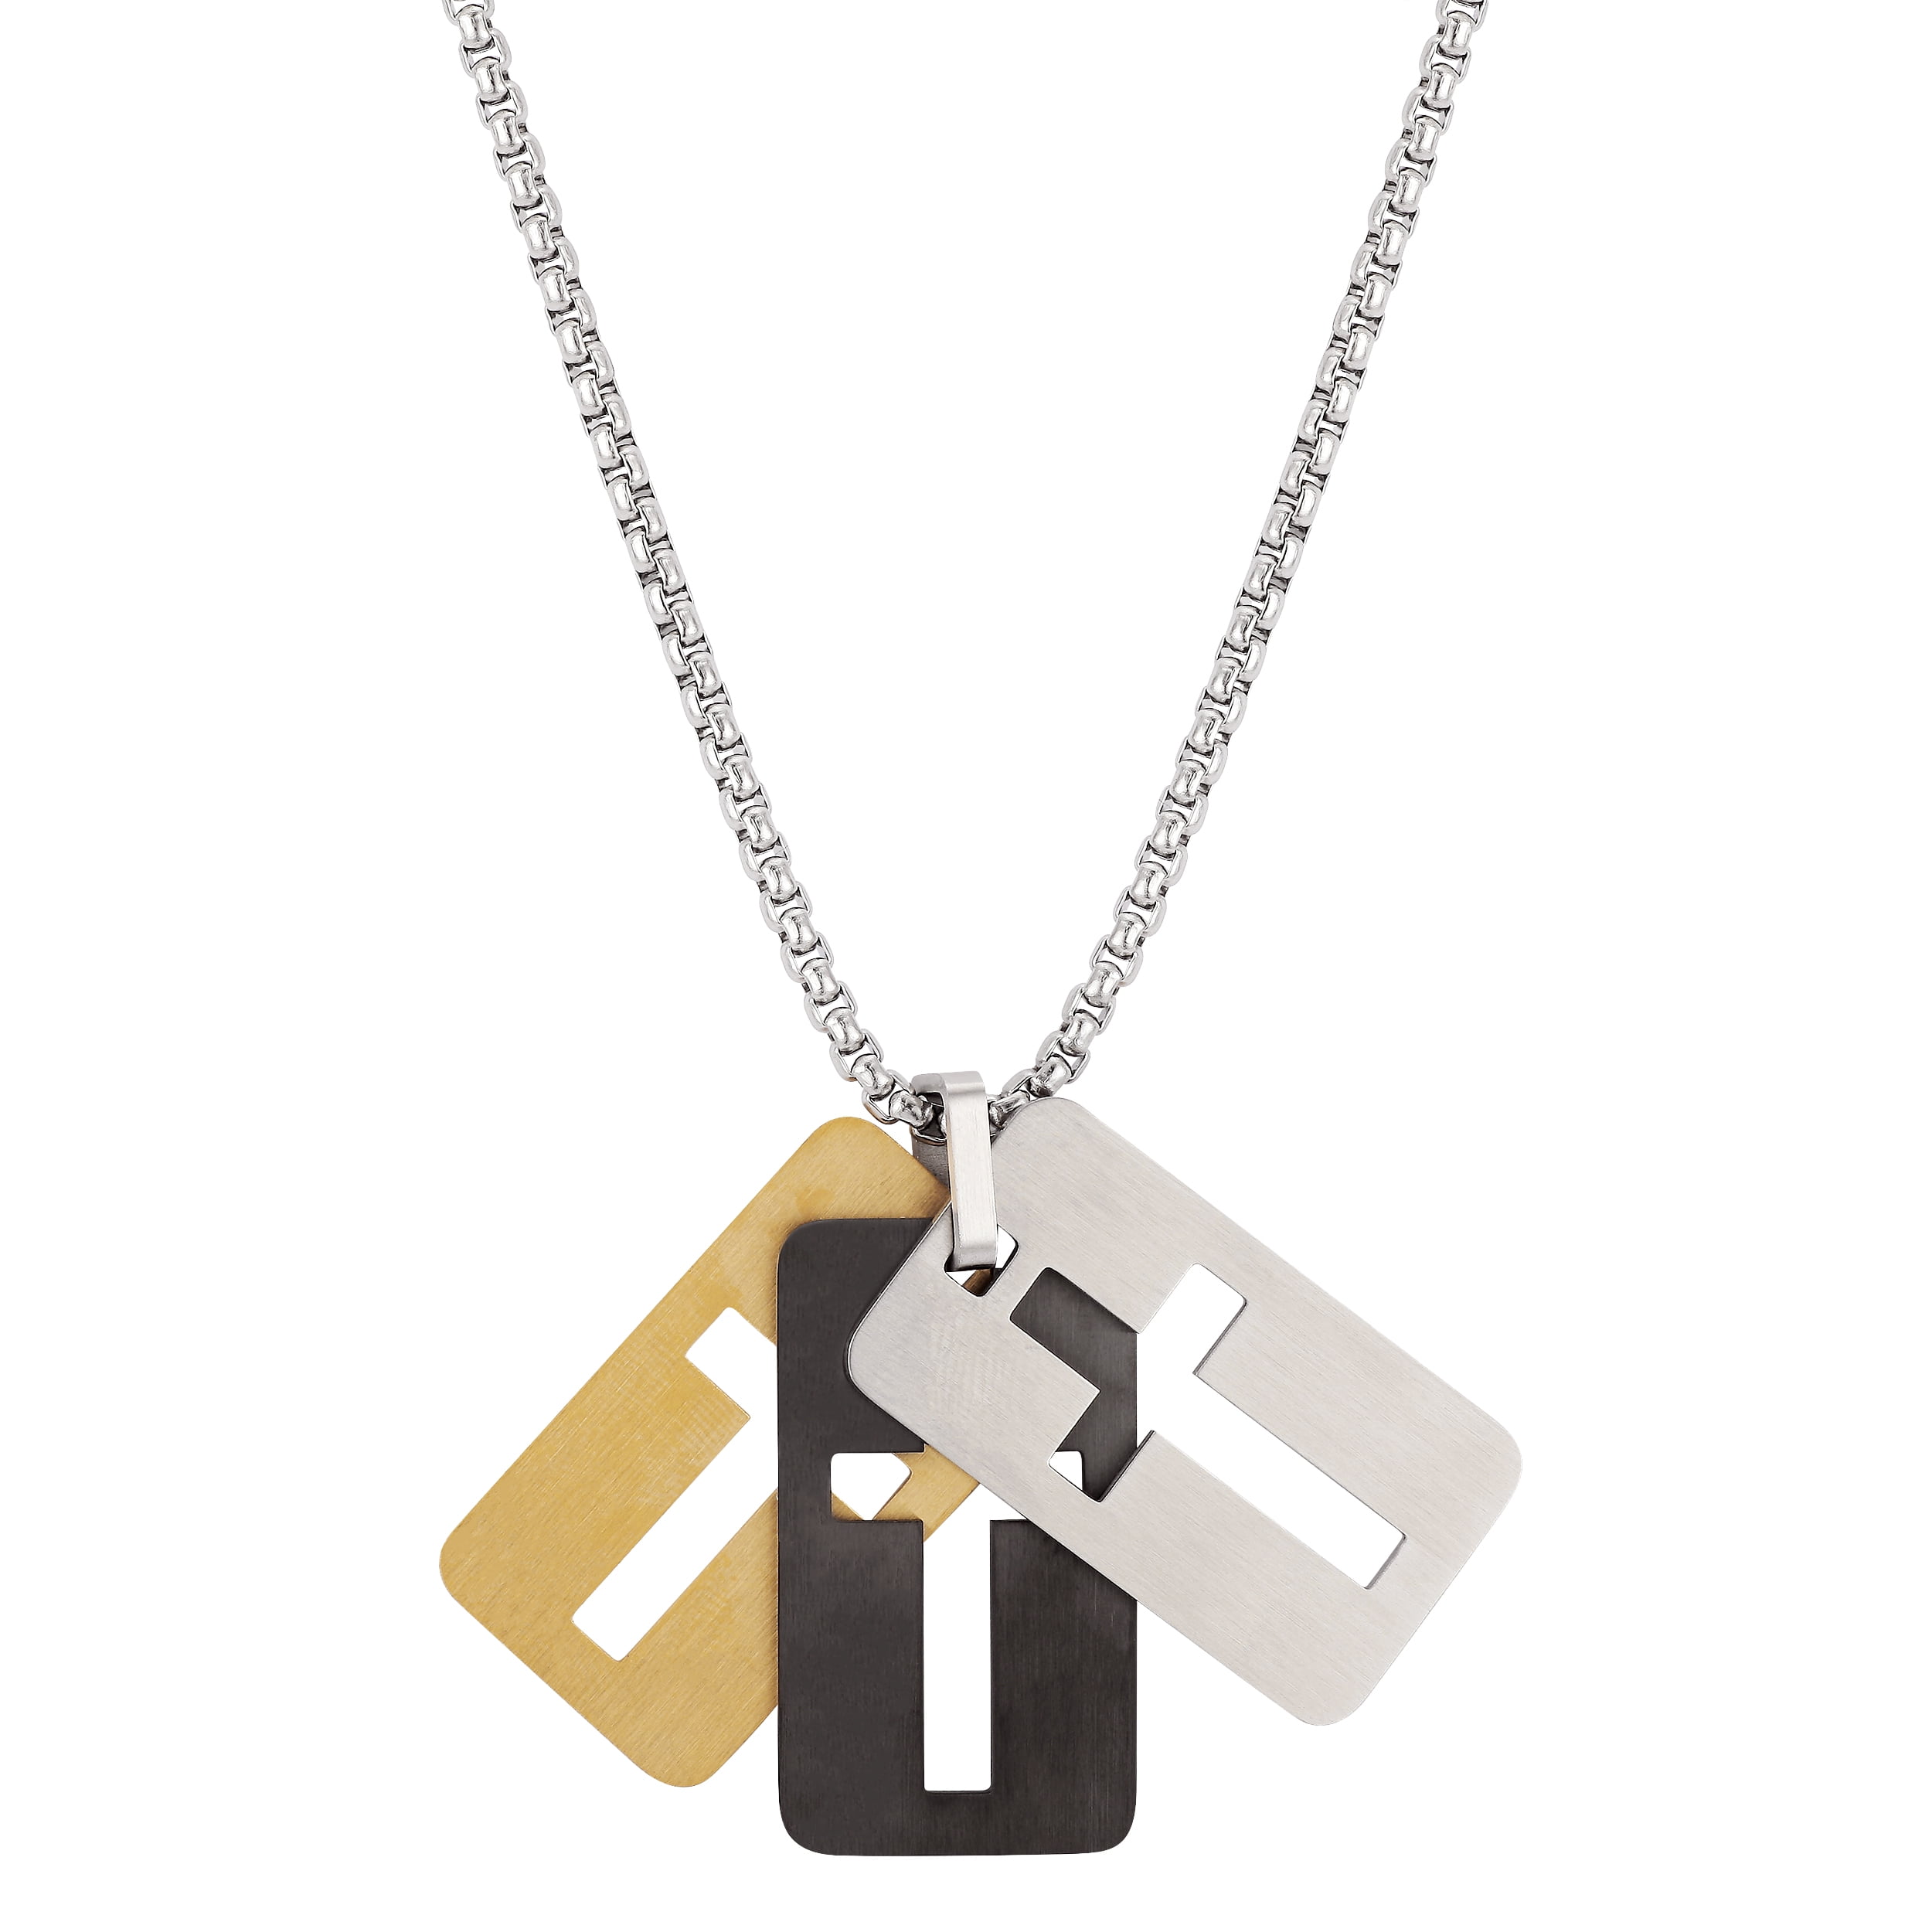 Men's Tri-Tone Stainless Steel Cross Dog Tag Pendant Necklace, 24" Length